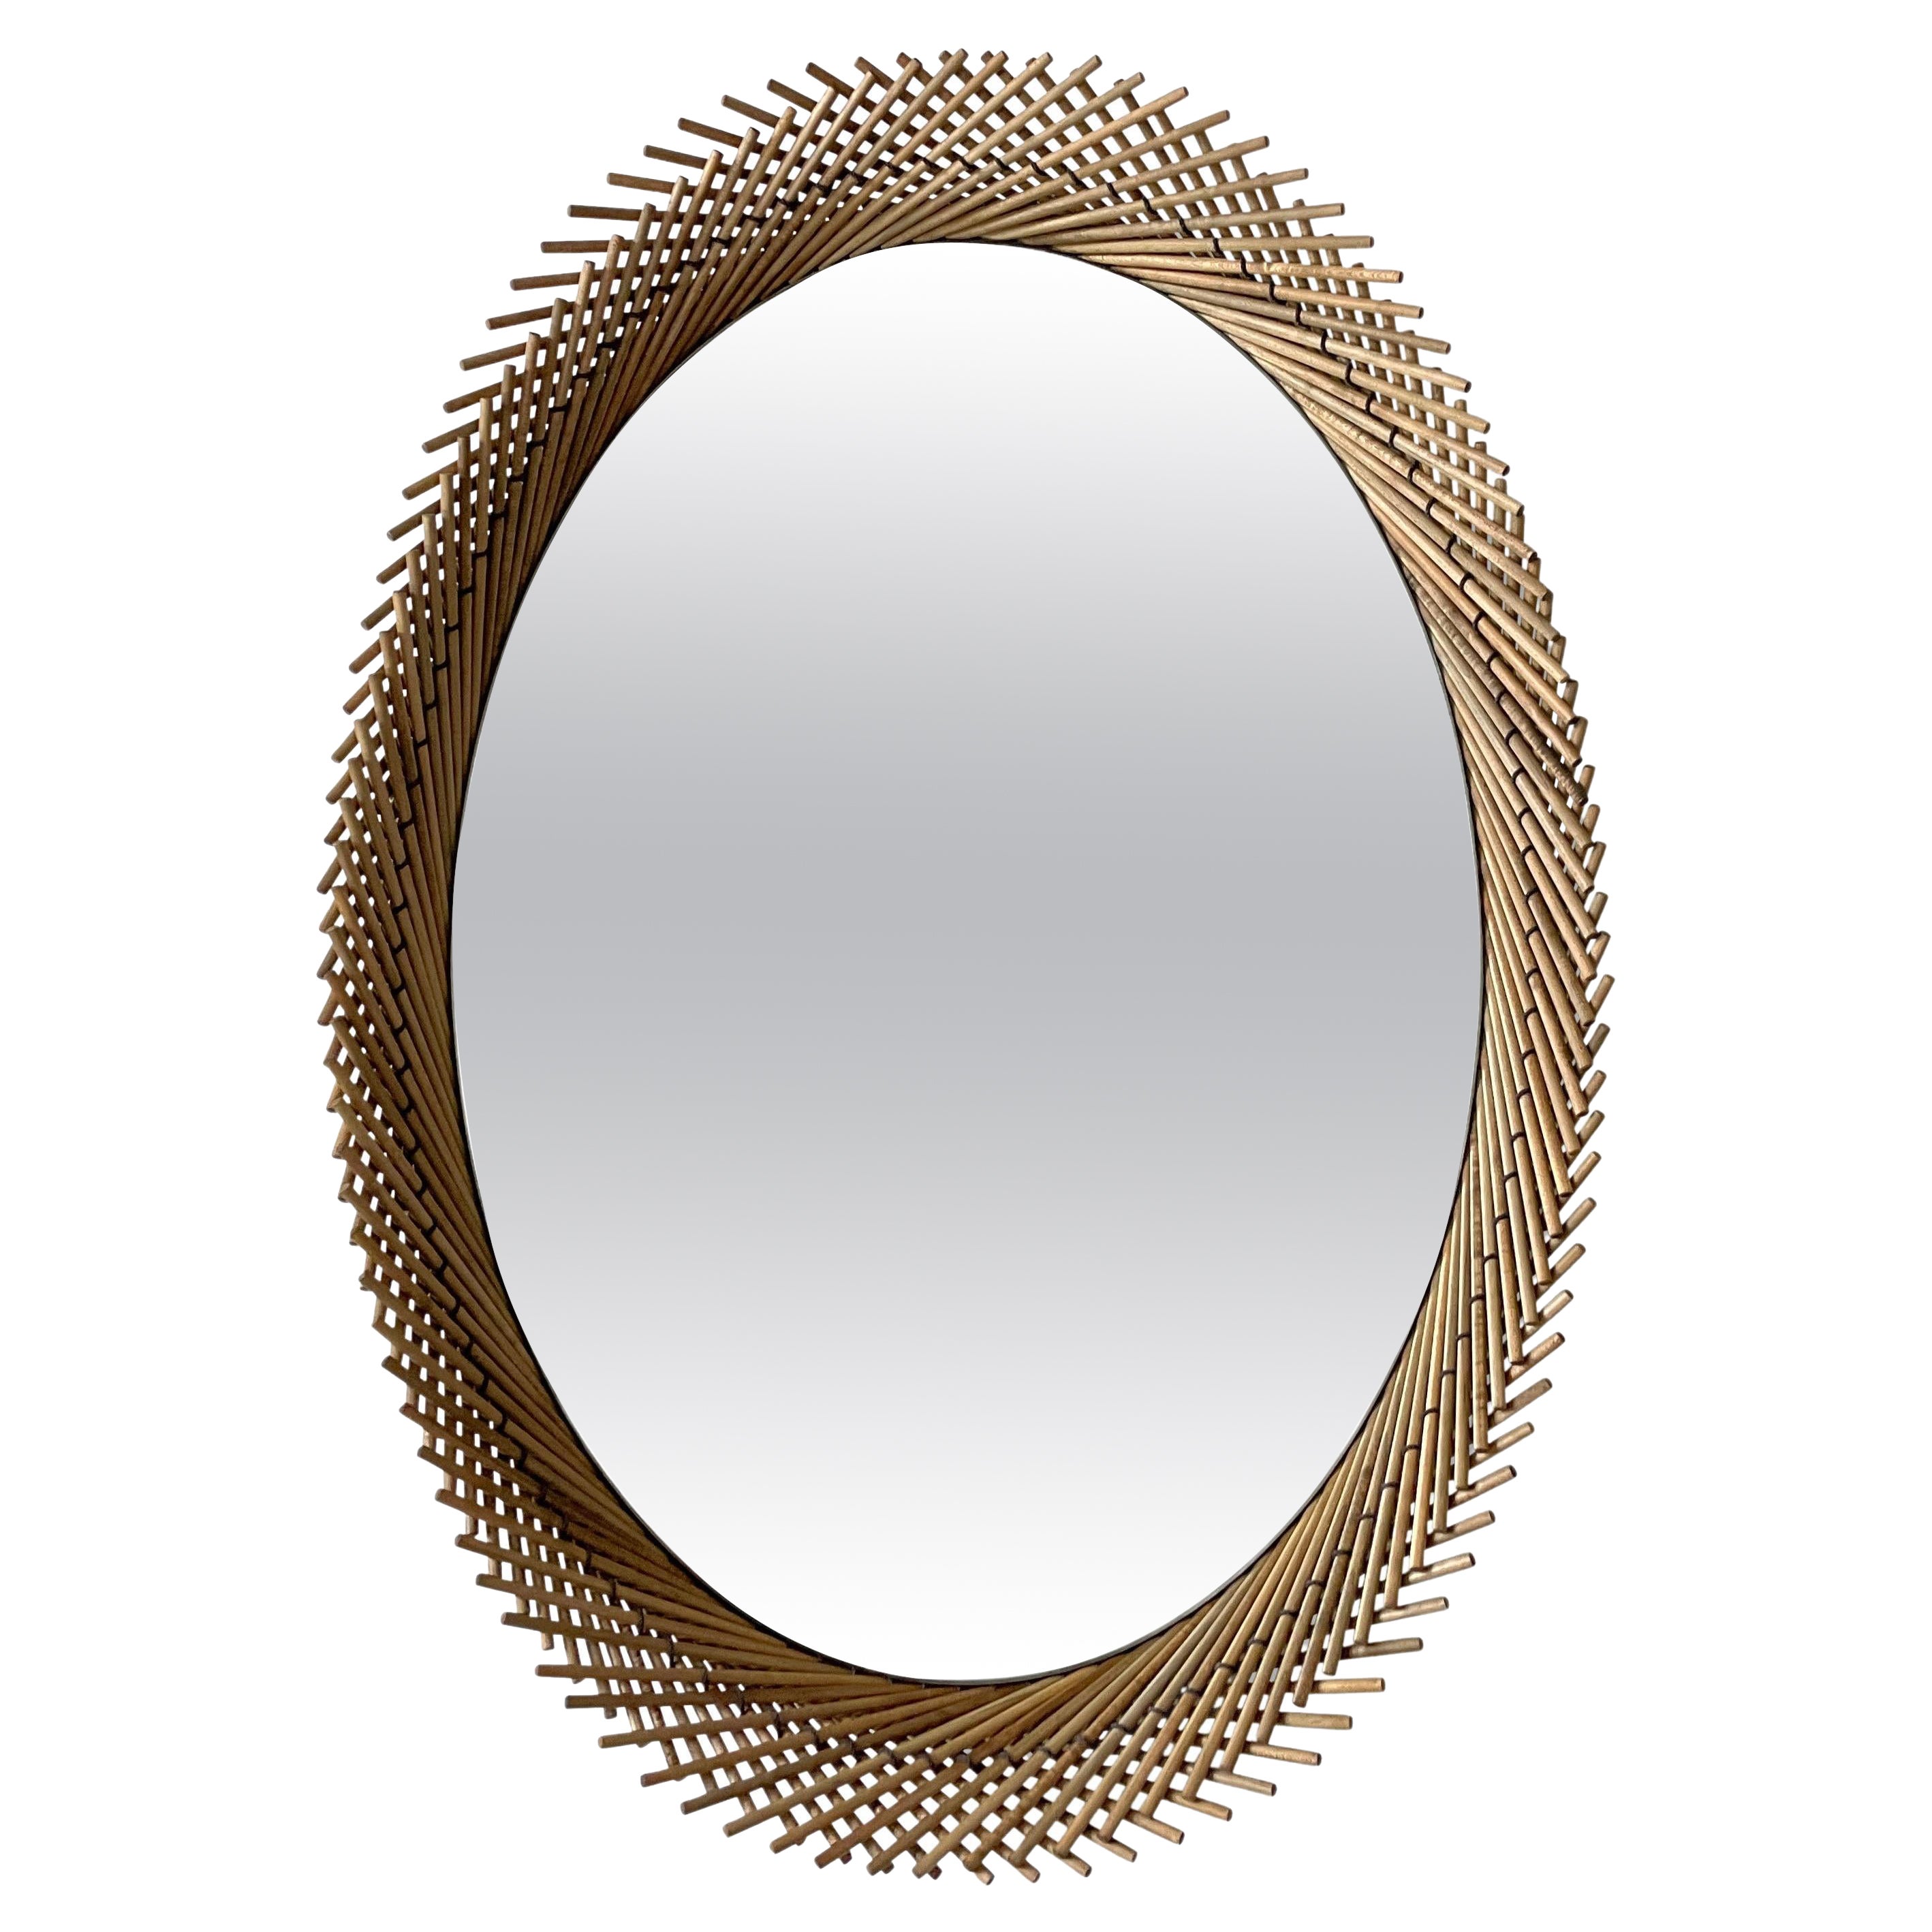 Mooda Mirror Oval 28 / Oxidized Maple Wood, Clear Mirror by INDO- For Sale